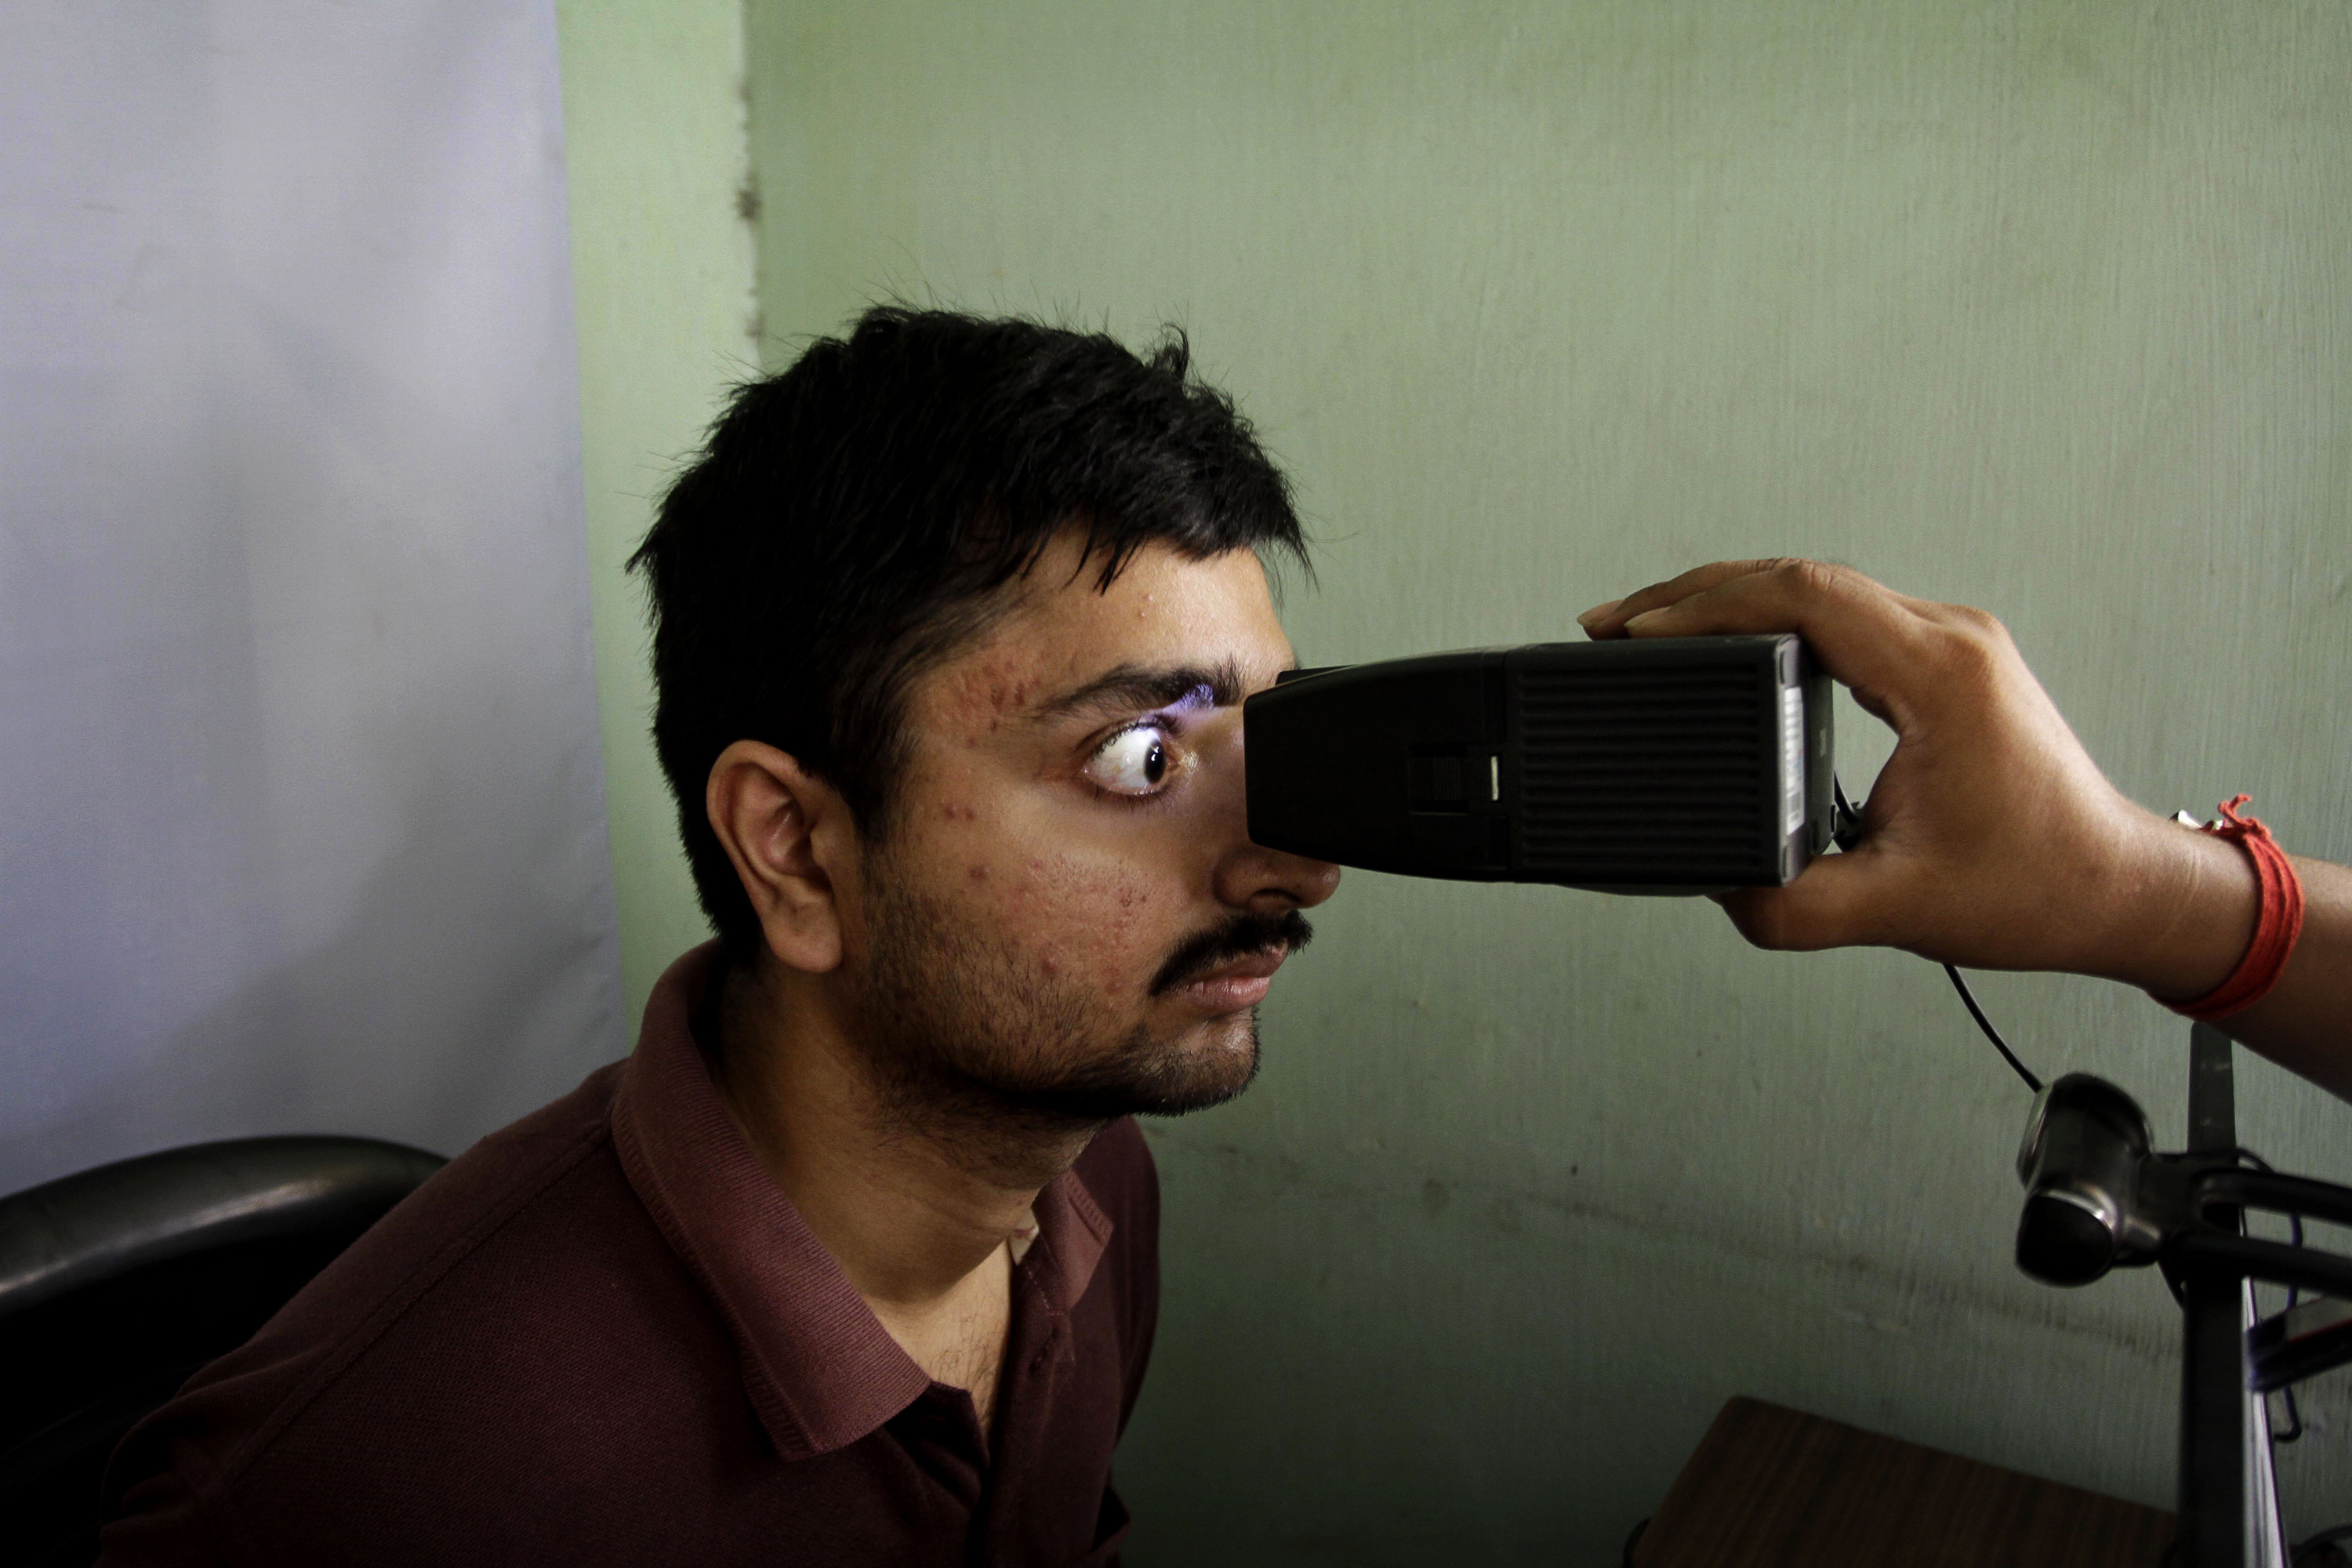 A man gets his retina scanned